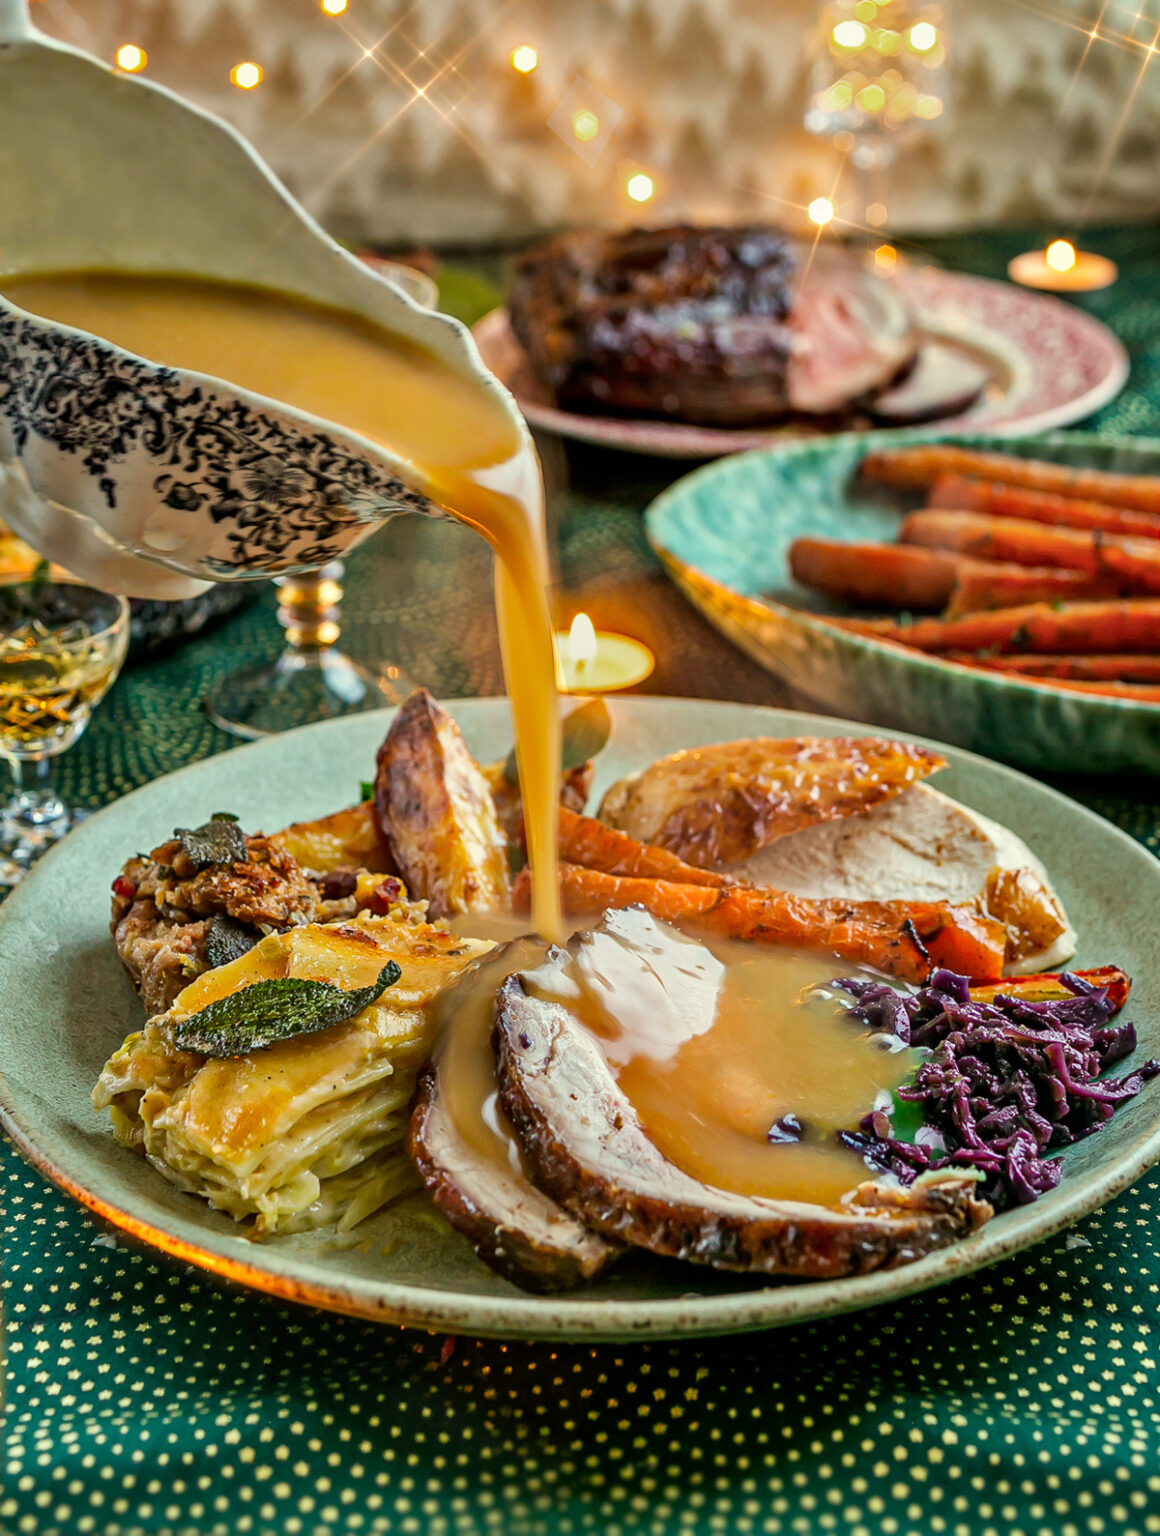 The Ultimate Christmas Dinner Classic Ingredients vamped up